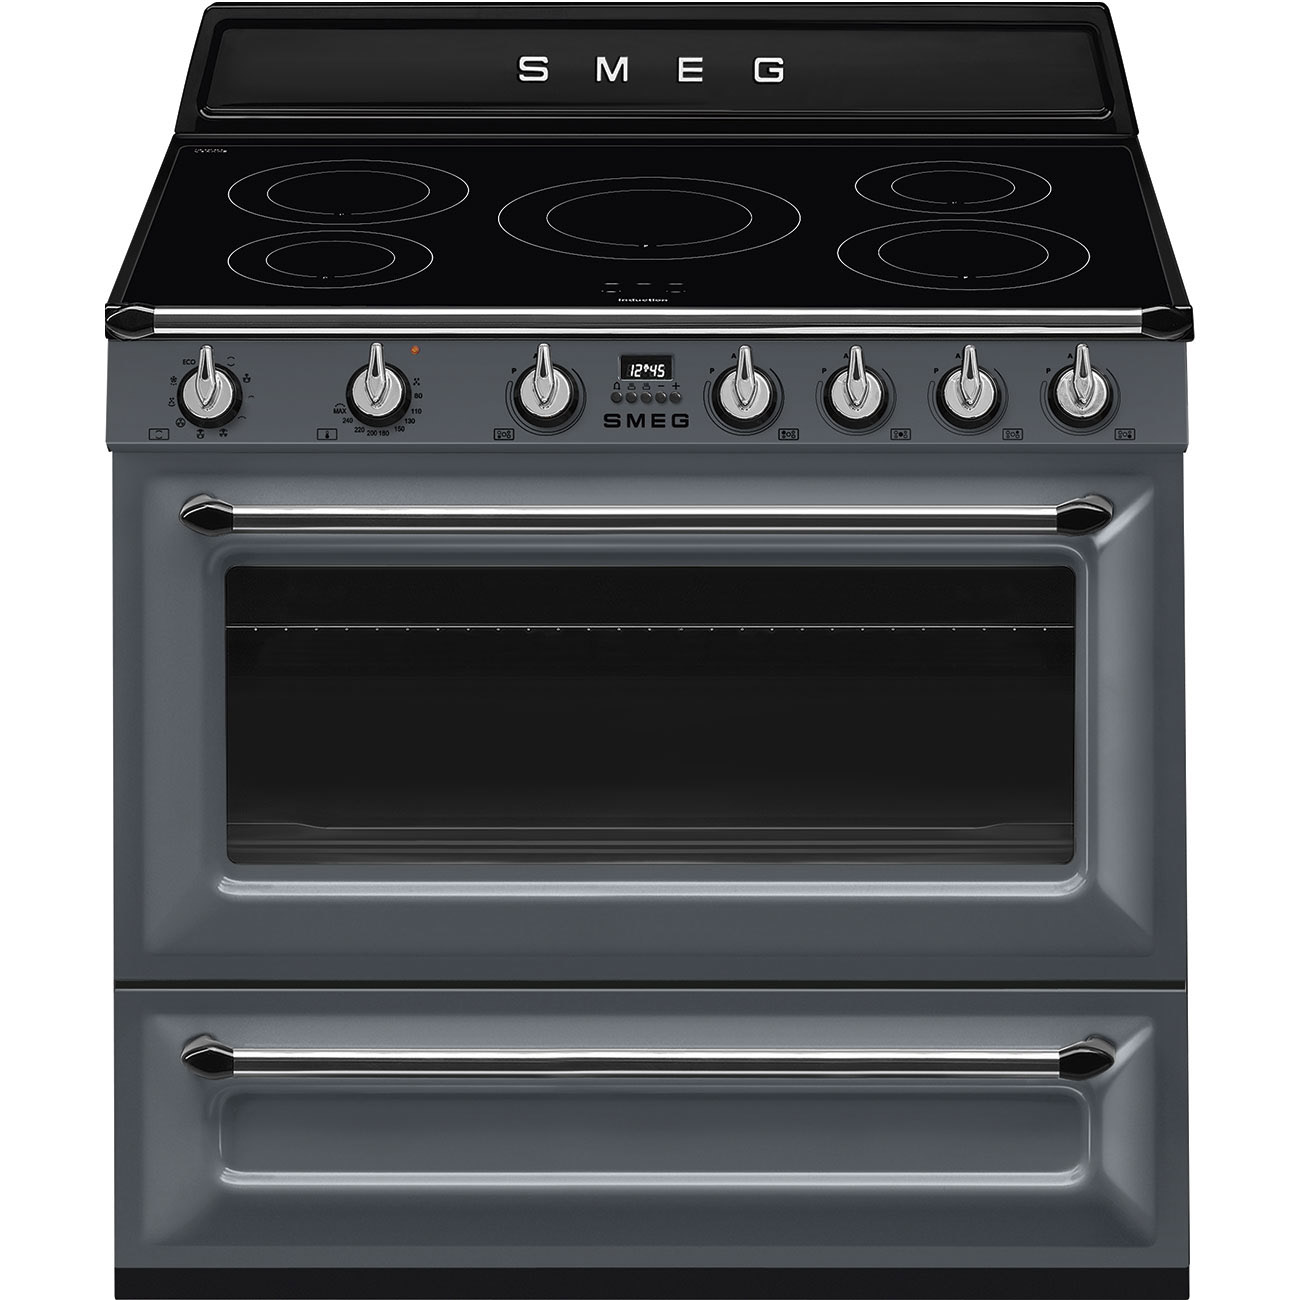 Smeg Slate Grey Cooker with Induction Hob_1